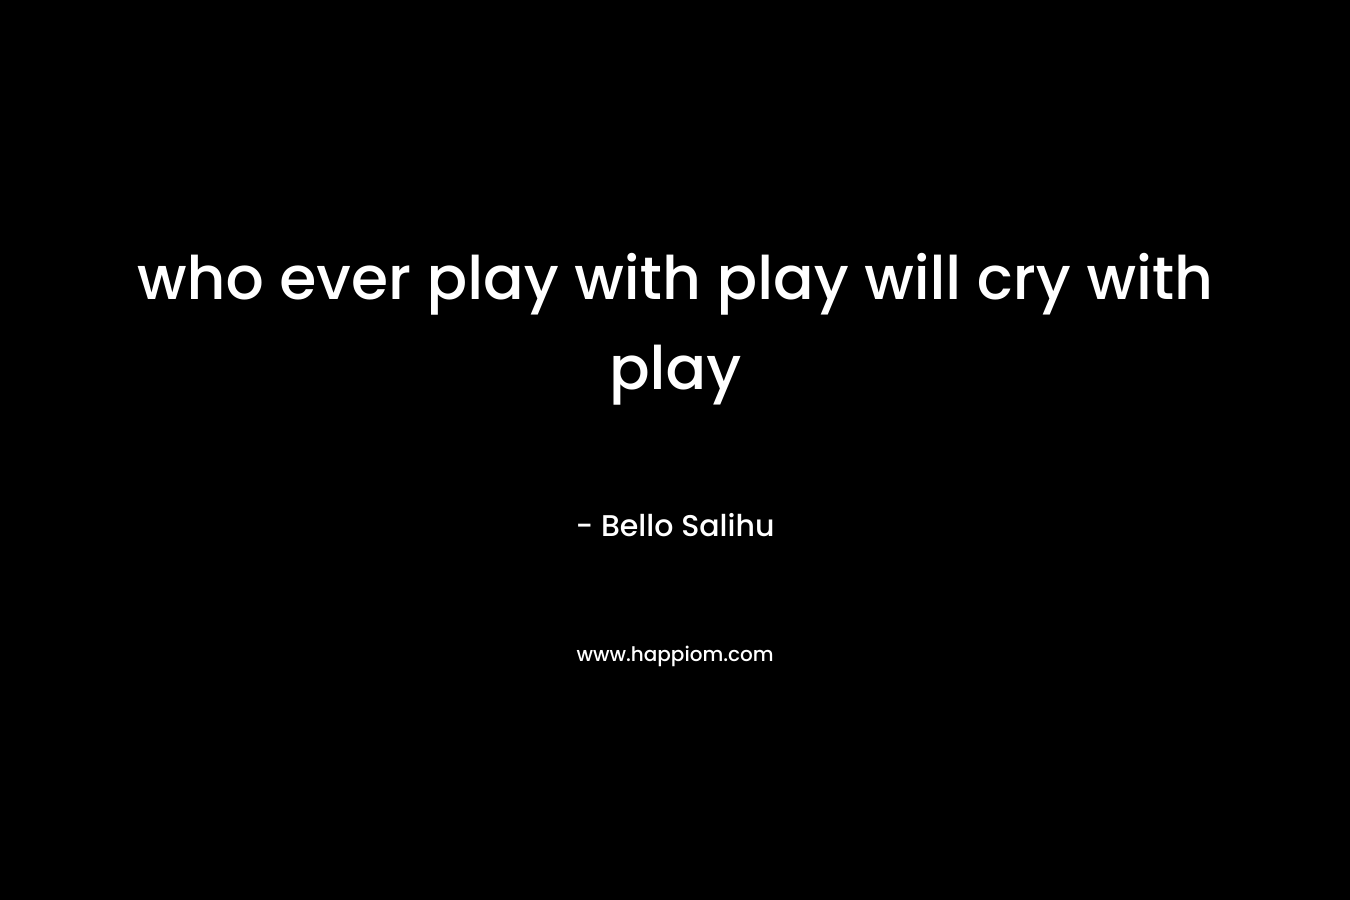 who ever play with play will cry with play